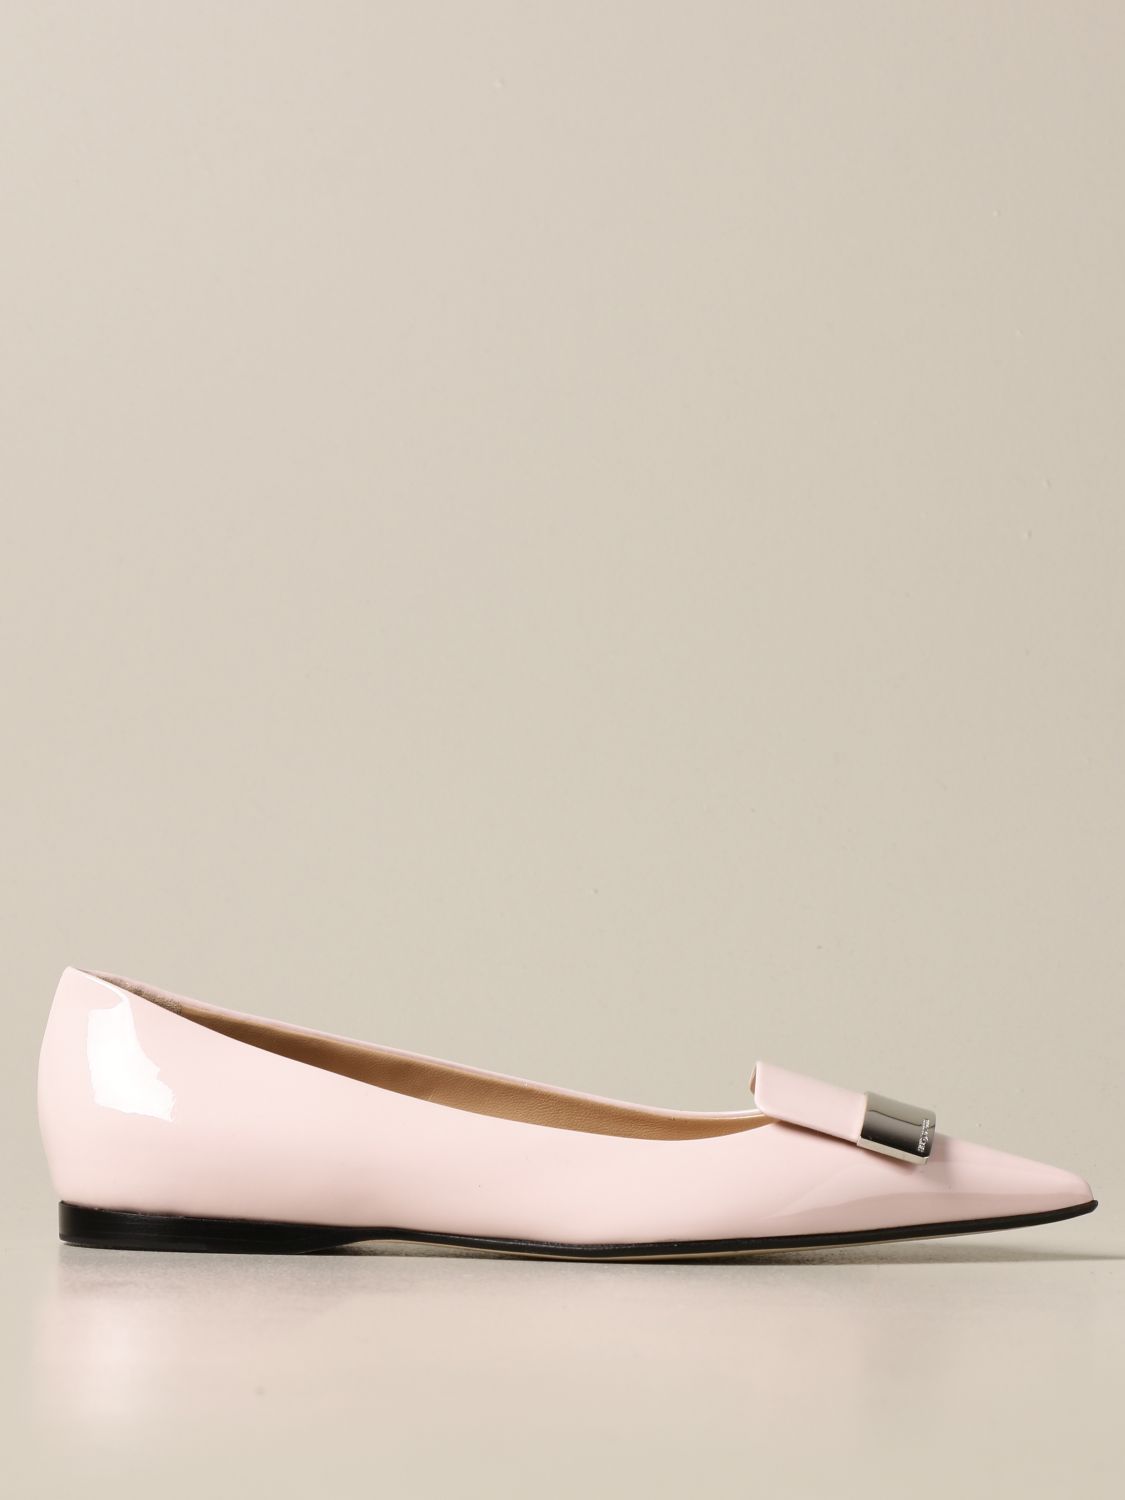 Sergio Rossi Outlet: Sr1 patent leather ballerina - Pink | Sergio Rossi  ballet flats A78960 MVIV01 online at GIGLIO.COM